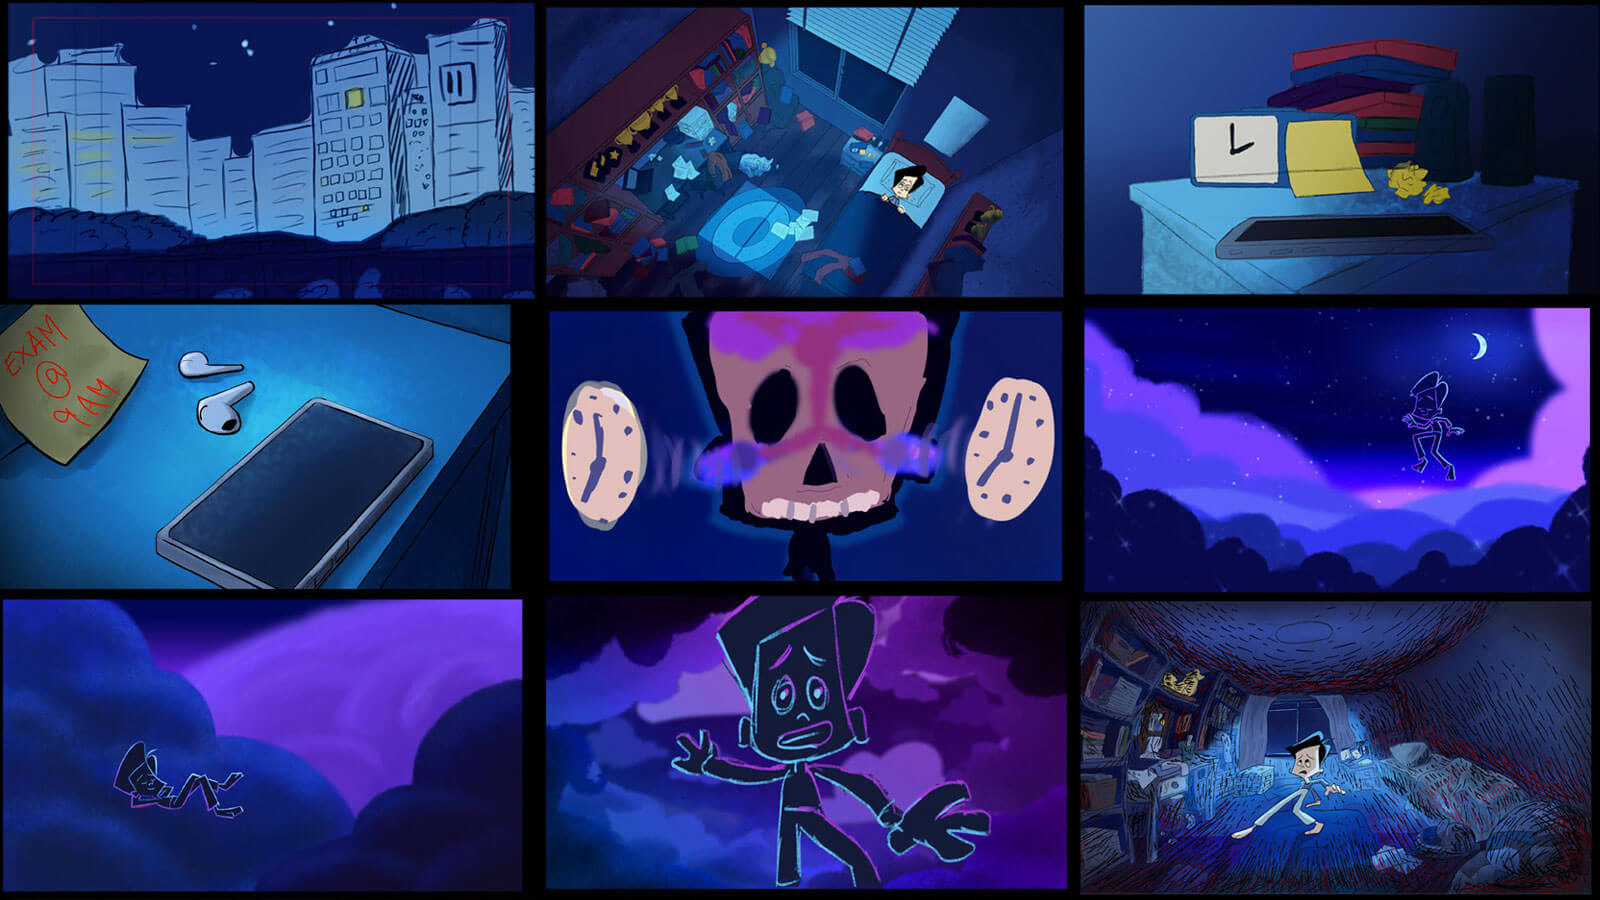 Collage of various stills from the animation during the boy's dream sequence